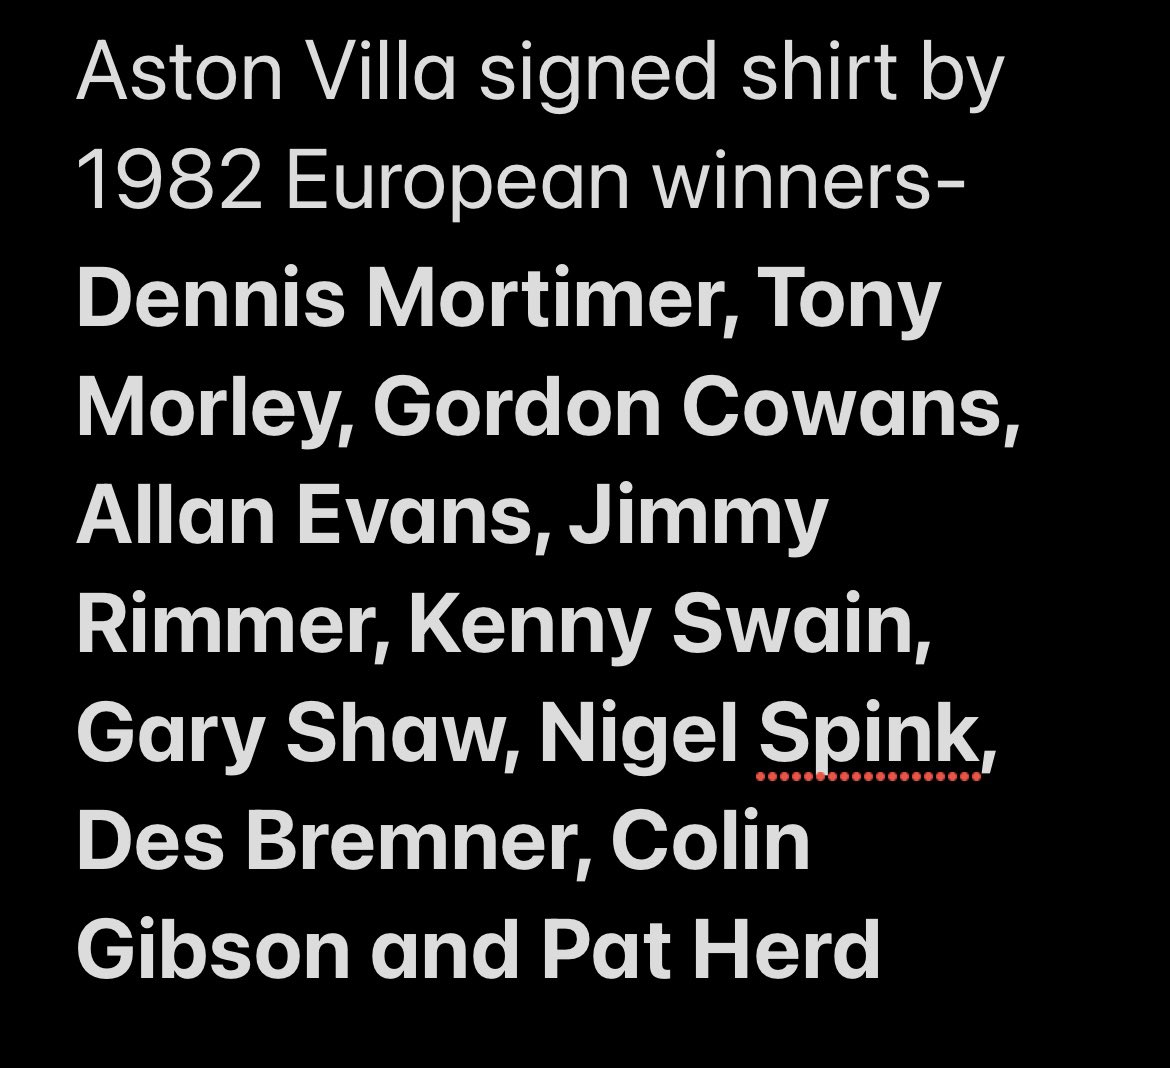 Aston Villa friends 👇🏻 
auctioning this framed Aston Villa shirt signed by 11 of the players who won the 1982 European Cup

Current Bid- £200 

If anyone would like to bid simply comment or DM me. 
Auction close 22.04.24
#AVFC #AstonVilla #AstonVillafc #villafamily #utvlife #UTV